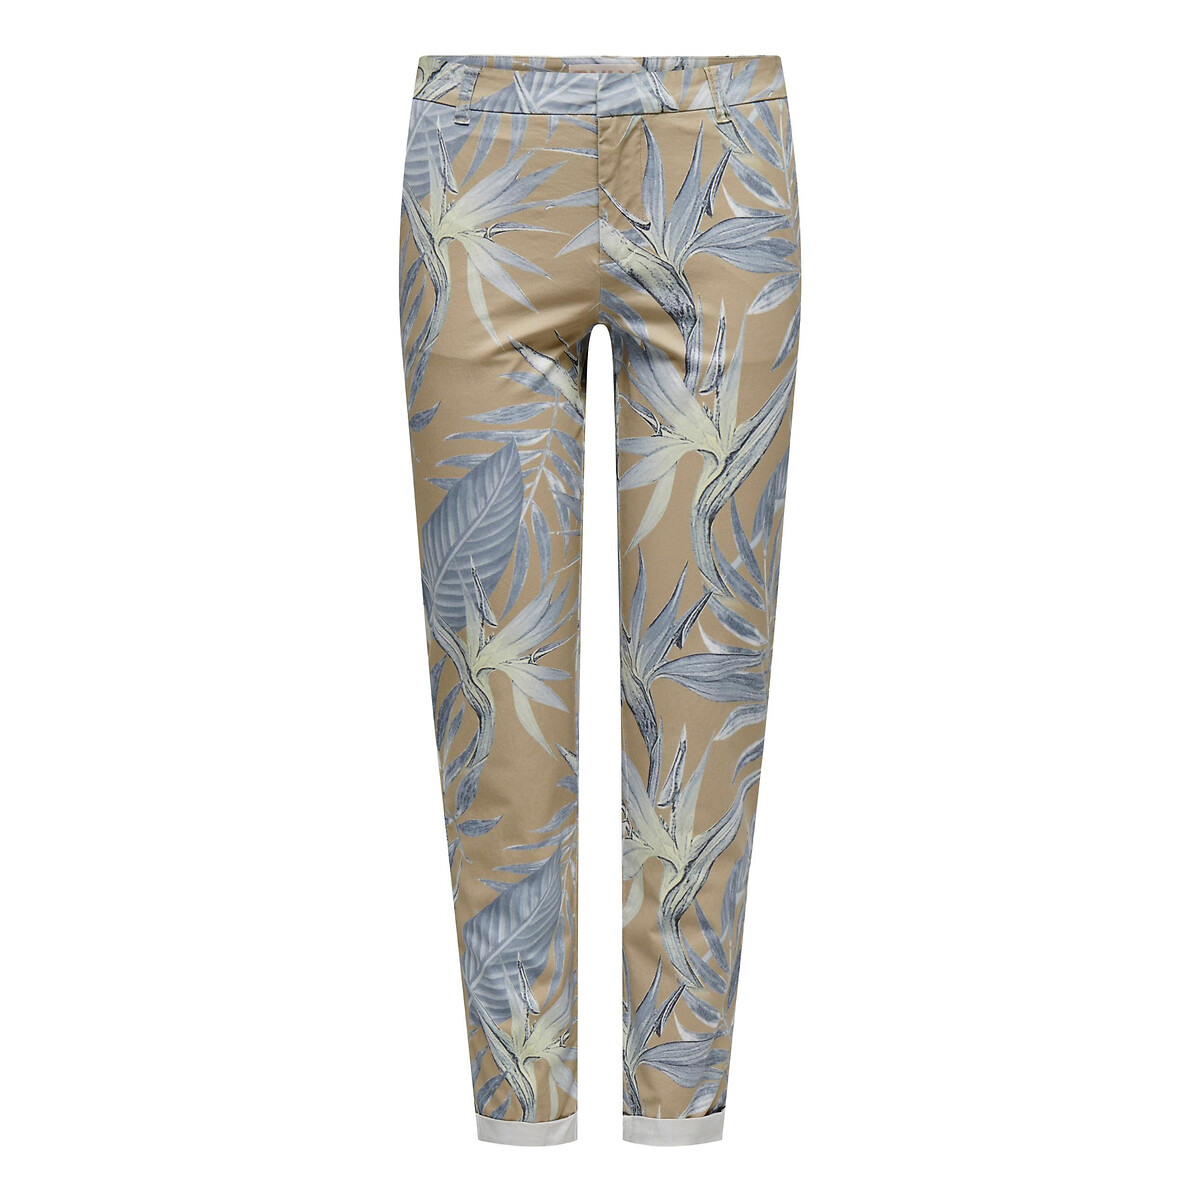 Image of Leaf Print Cotton Chinos